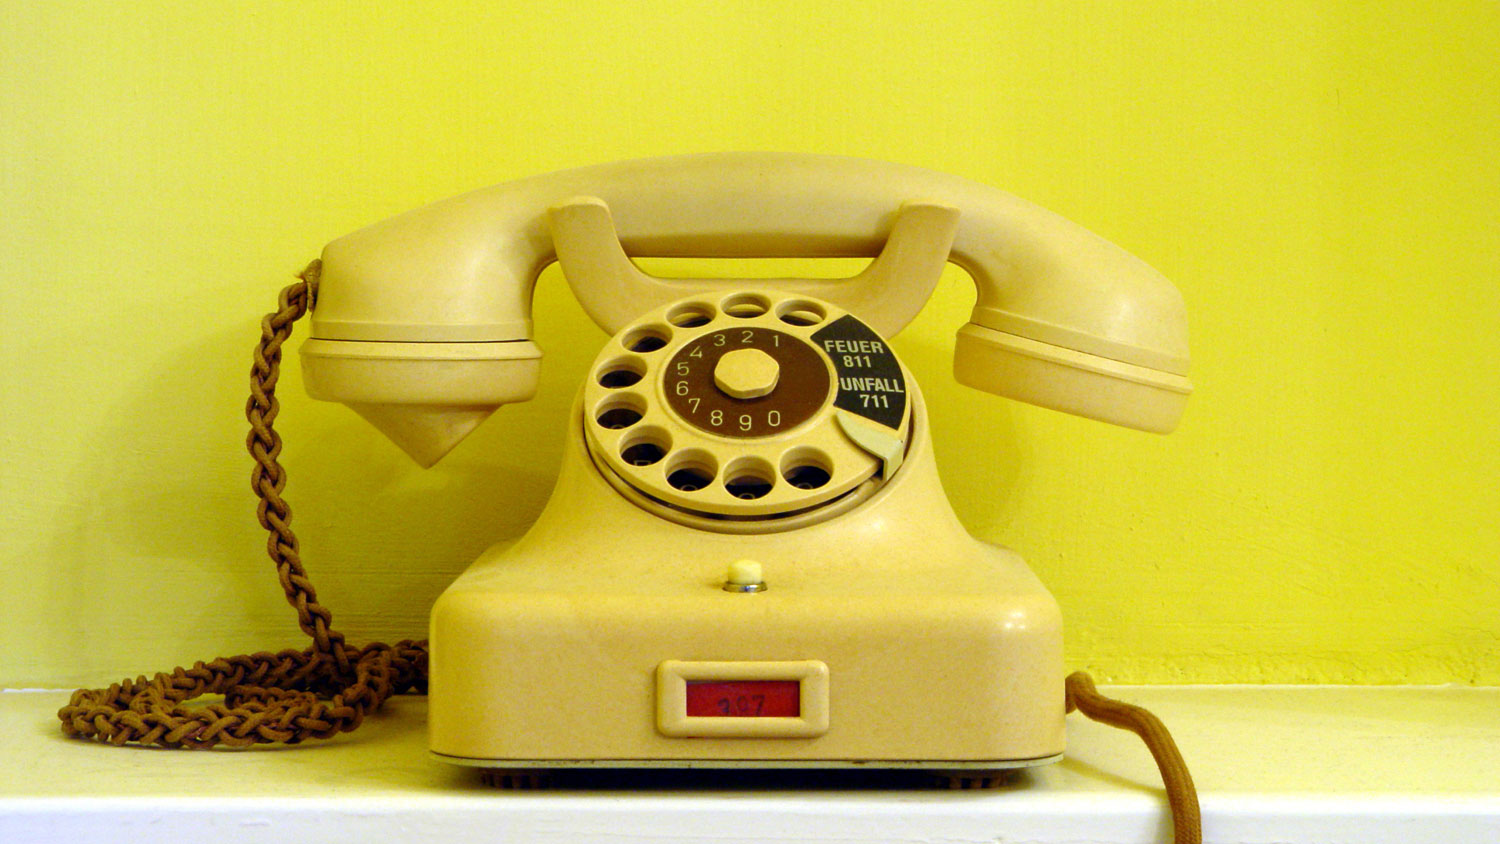 Cellphone service surpasses that of landlines in US households for the first time